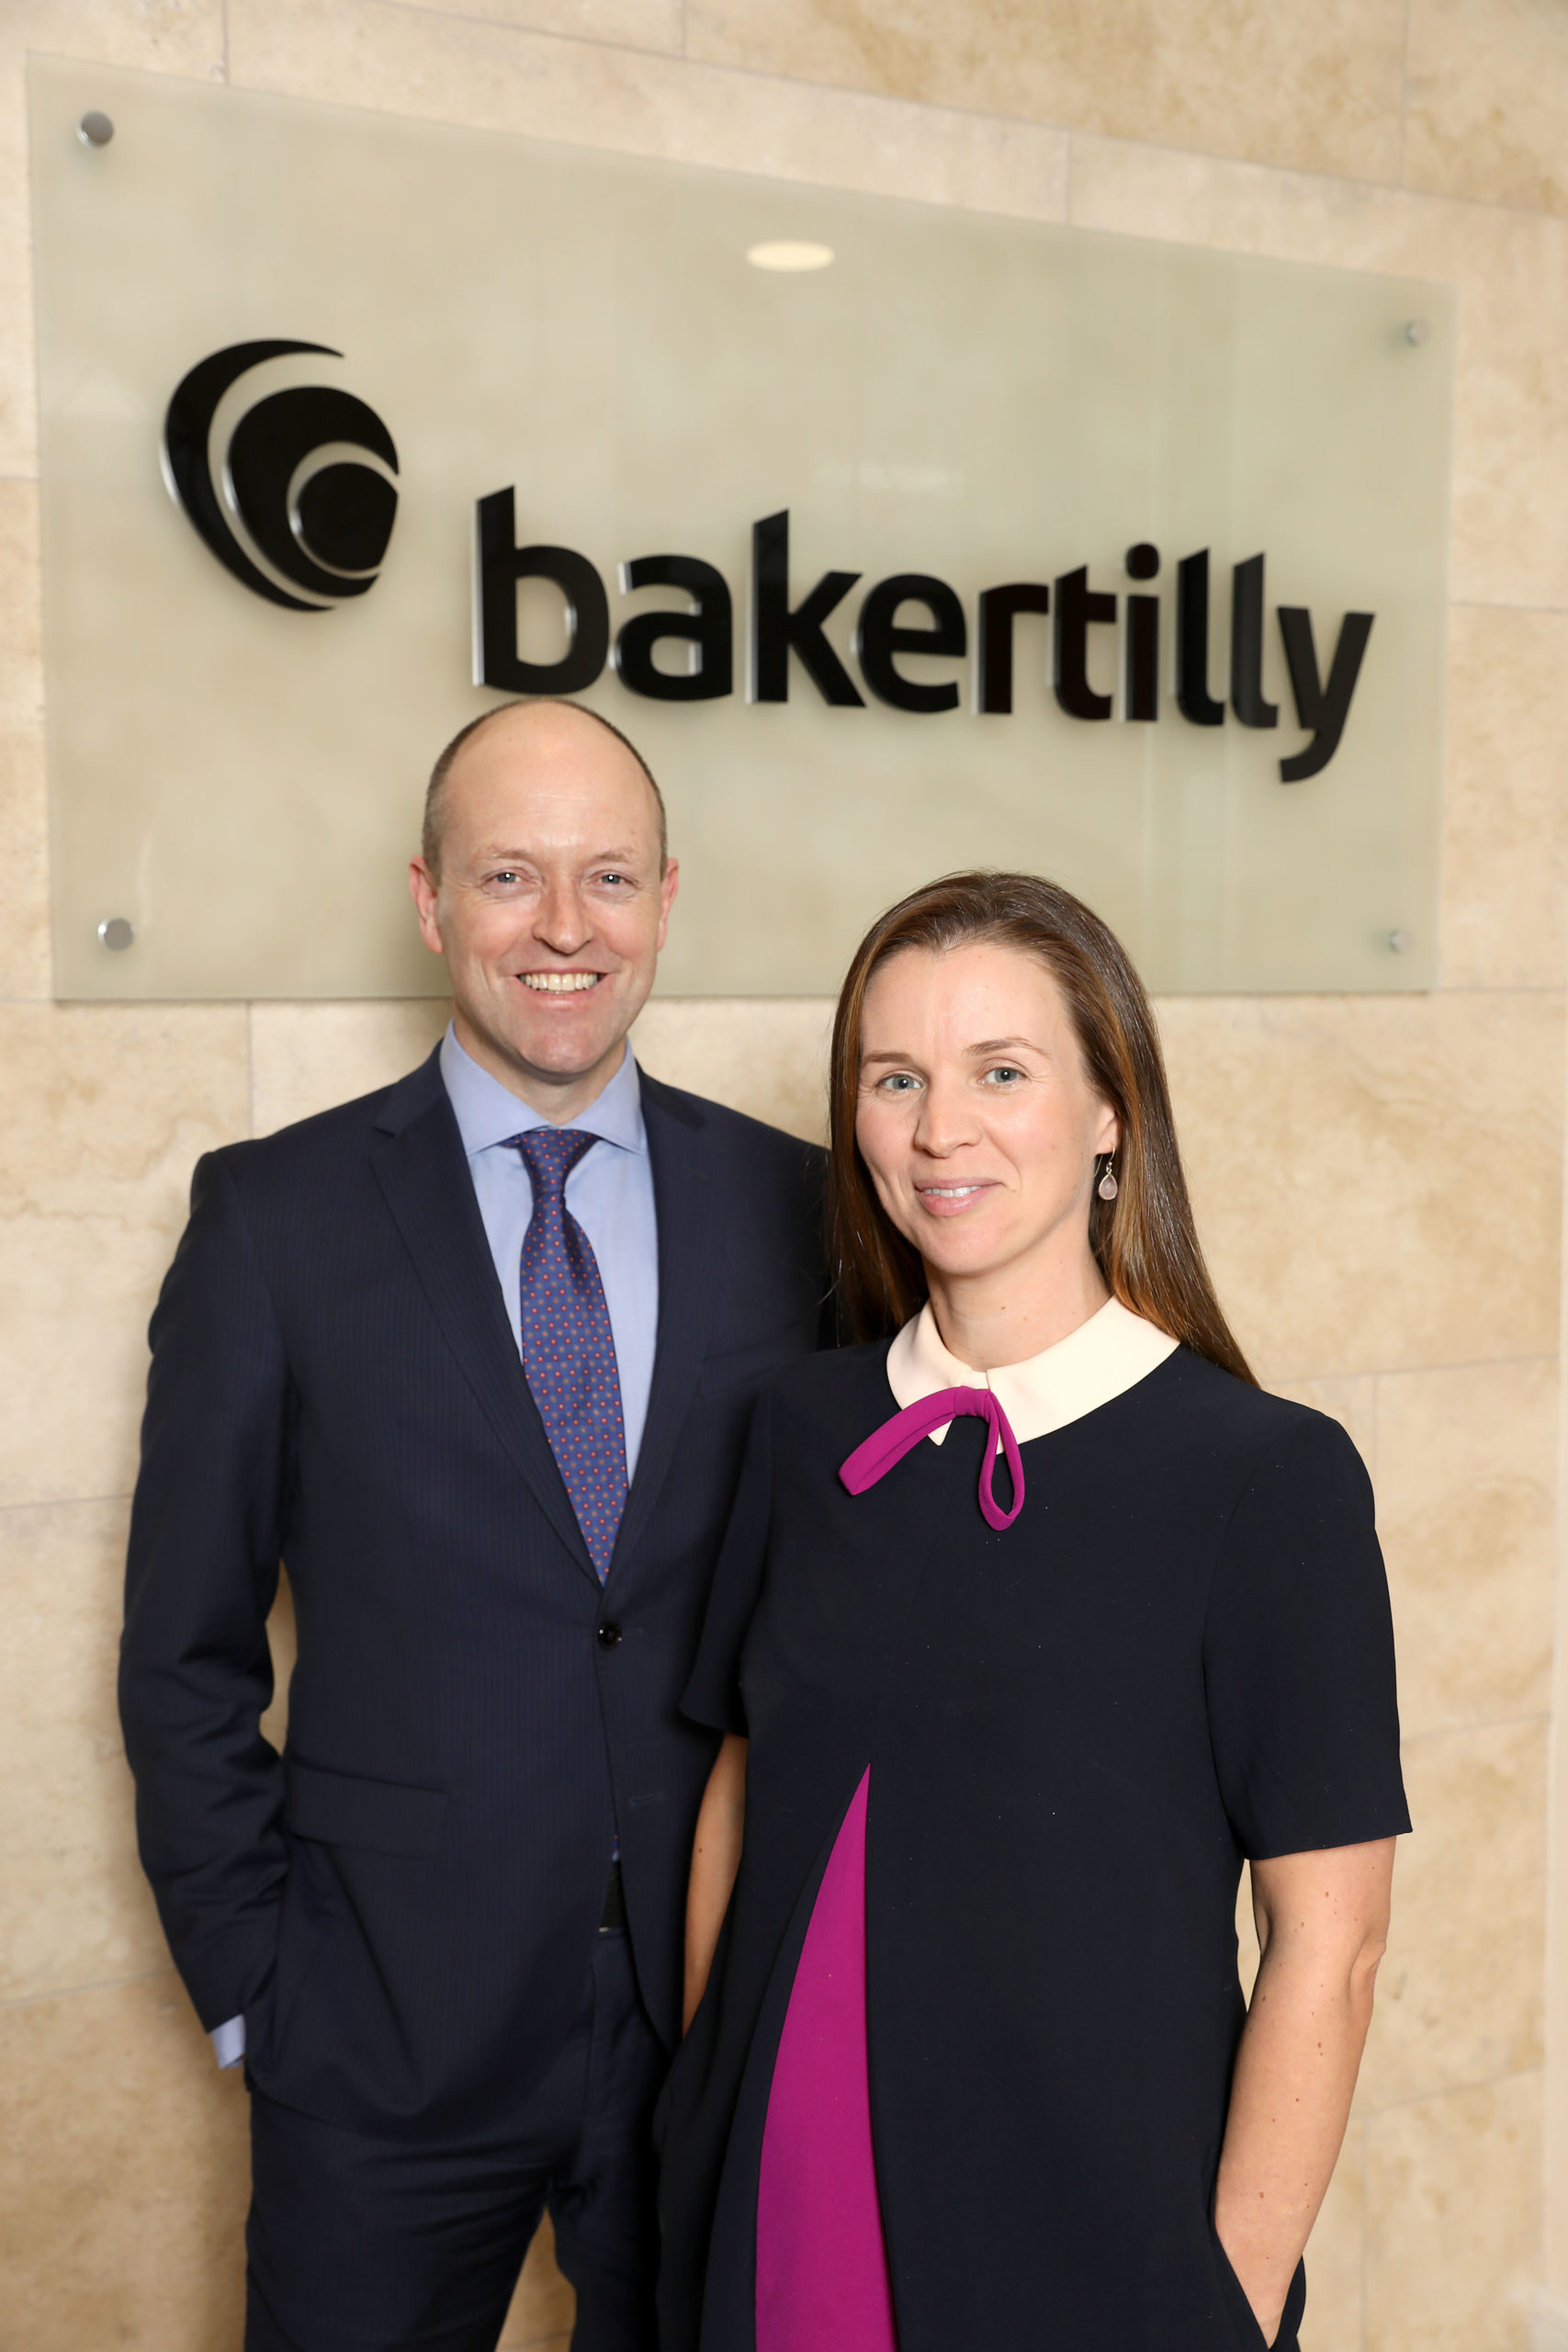 Baker Tilly Appoints New Partner to South East Region County Wexford